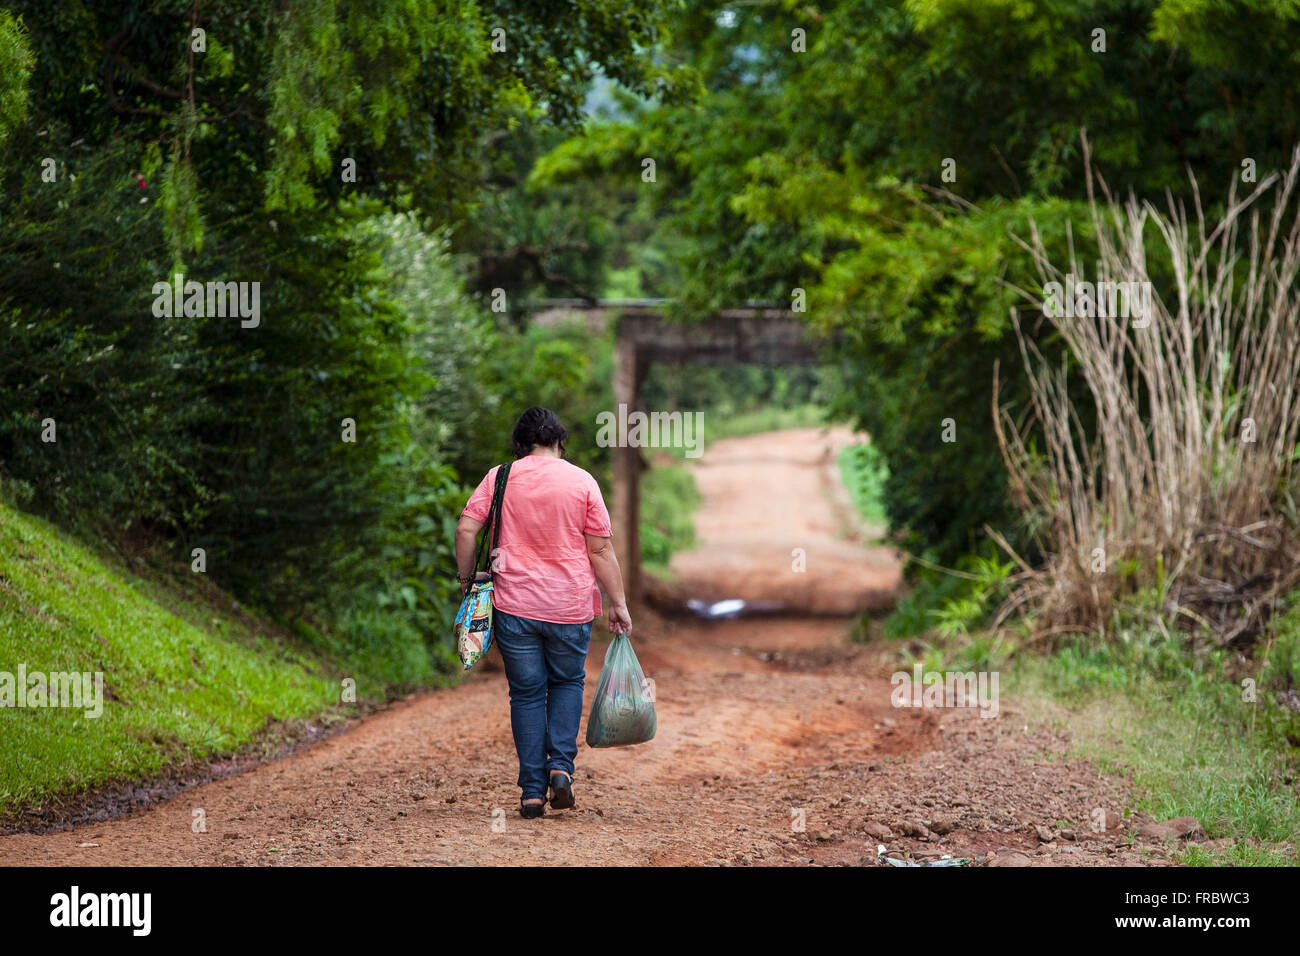 Woman walking on a dirt road in the countryside Stock Photo